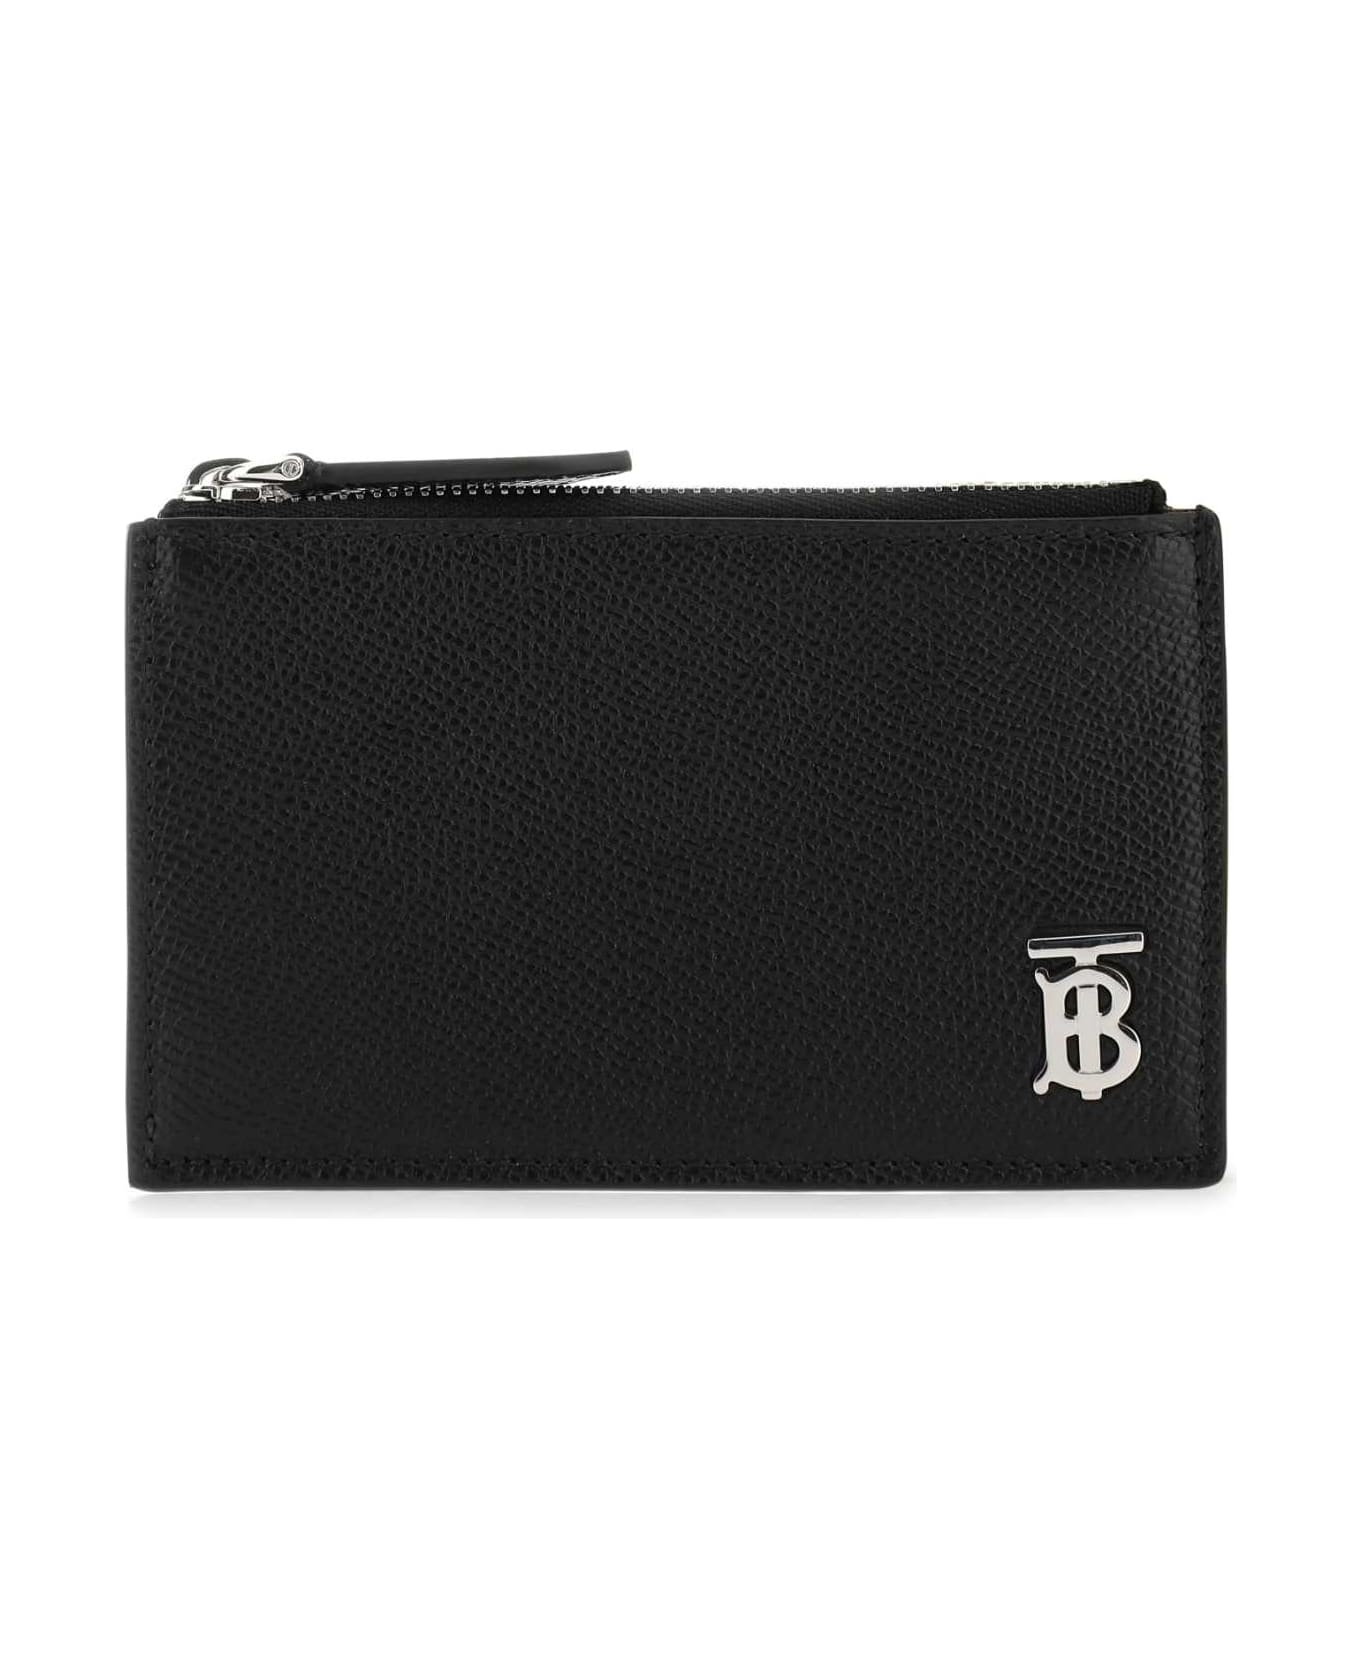 Burberry Black Leather Card Holder - A1189